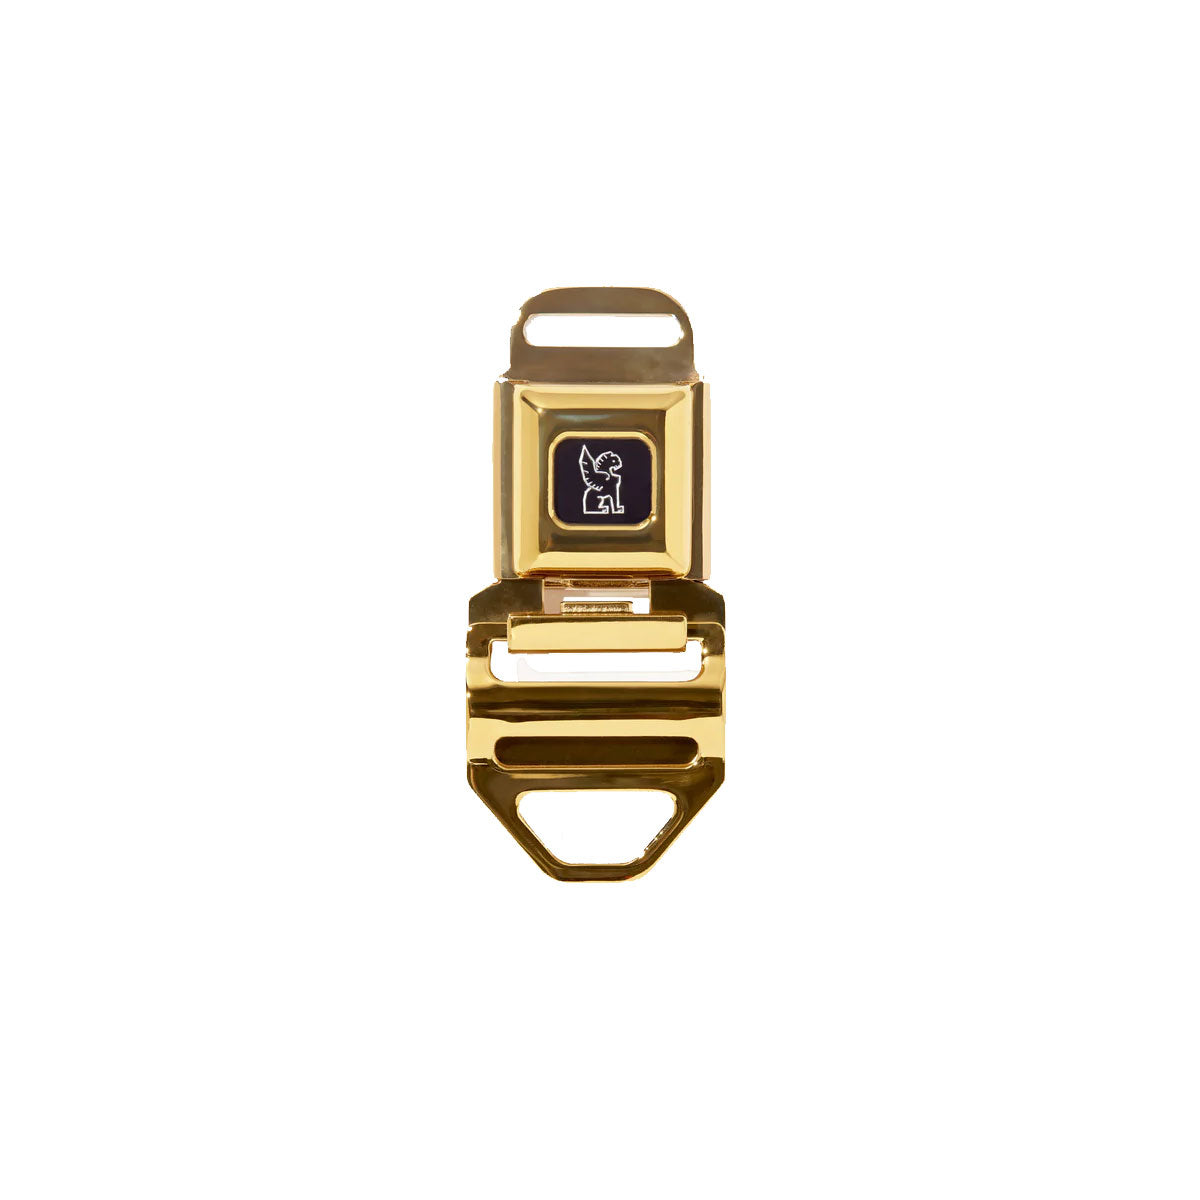 Chrome Industries: Seatbelt Buckle MD (1.5") : Gold